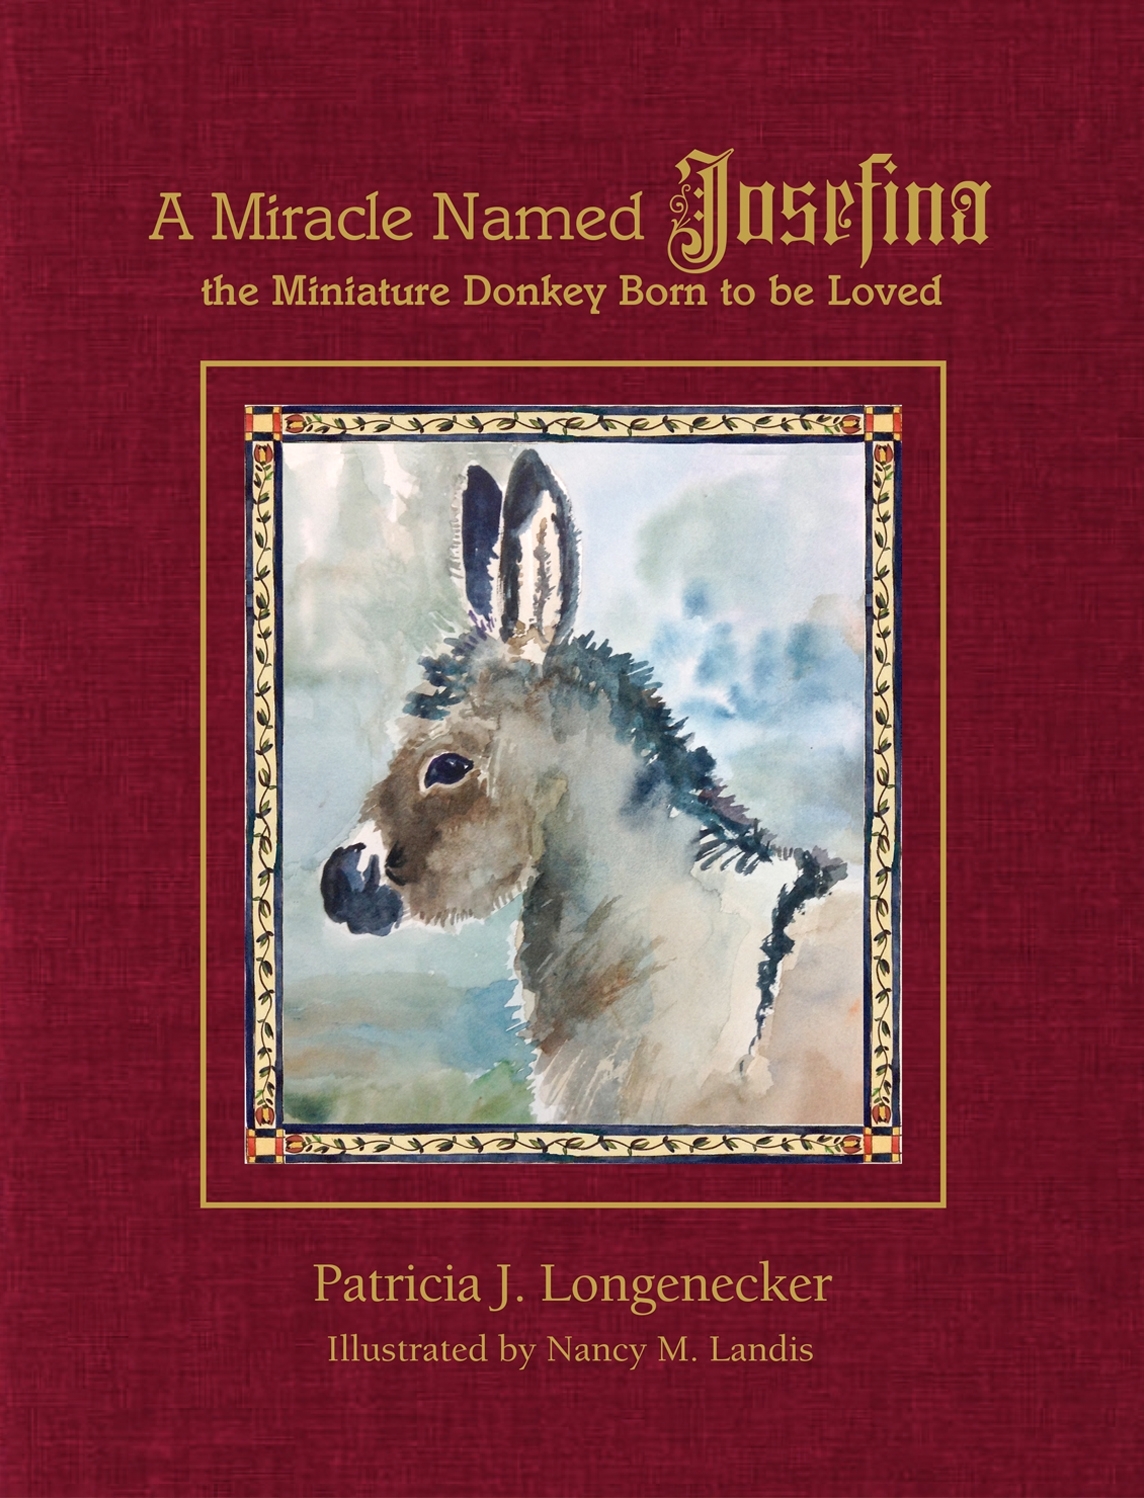 A Miracle Named Josefina, <em>the Miniature Donkey Born to be Loved</em>